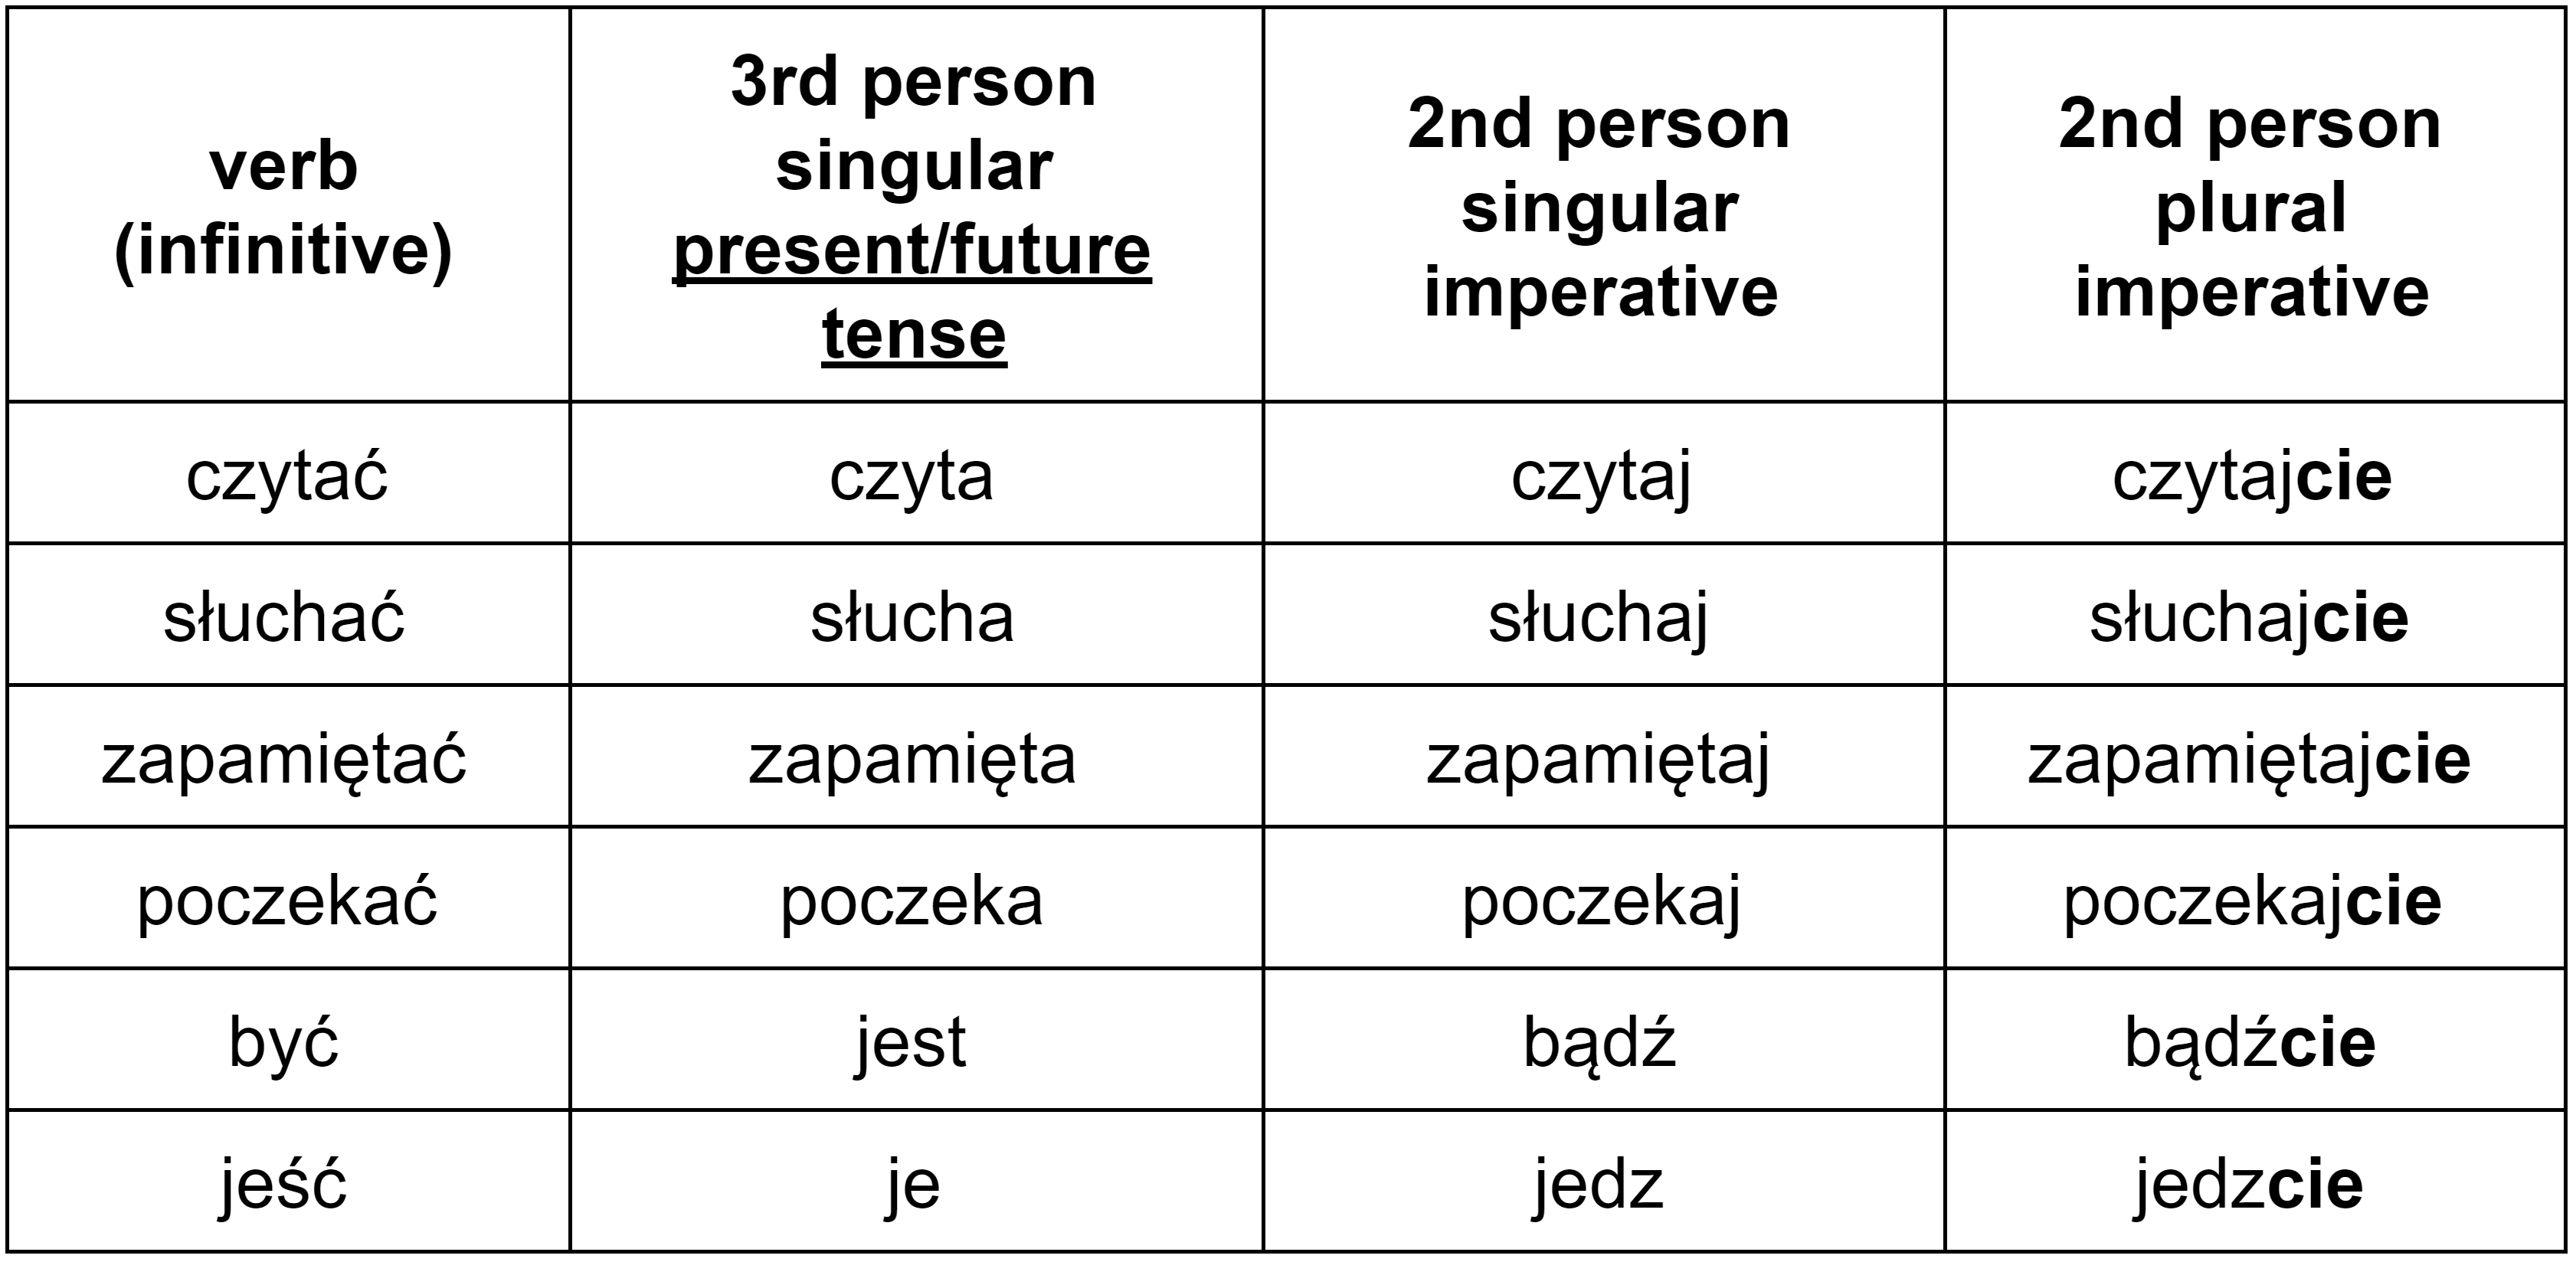 The Complete Guide to Polish Imperative Verbs